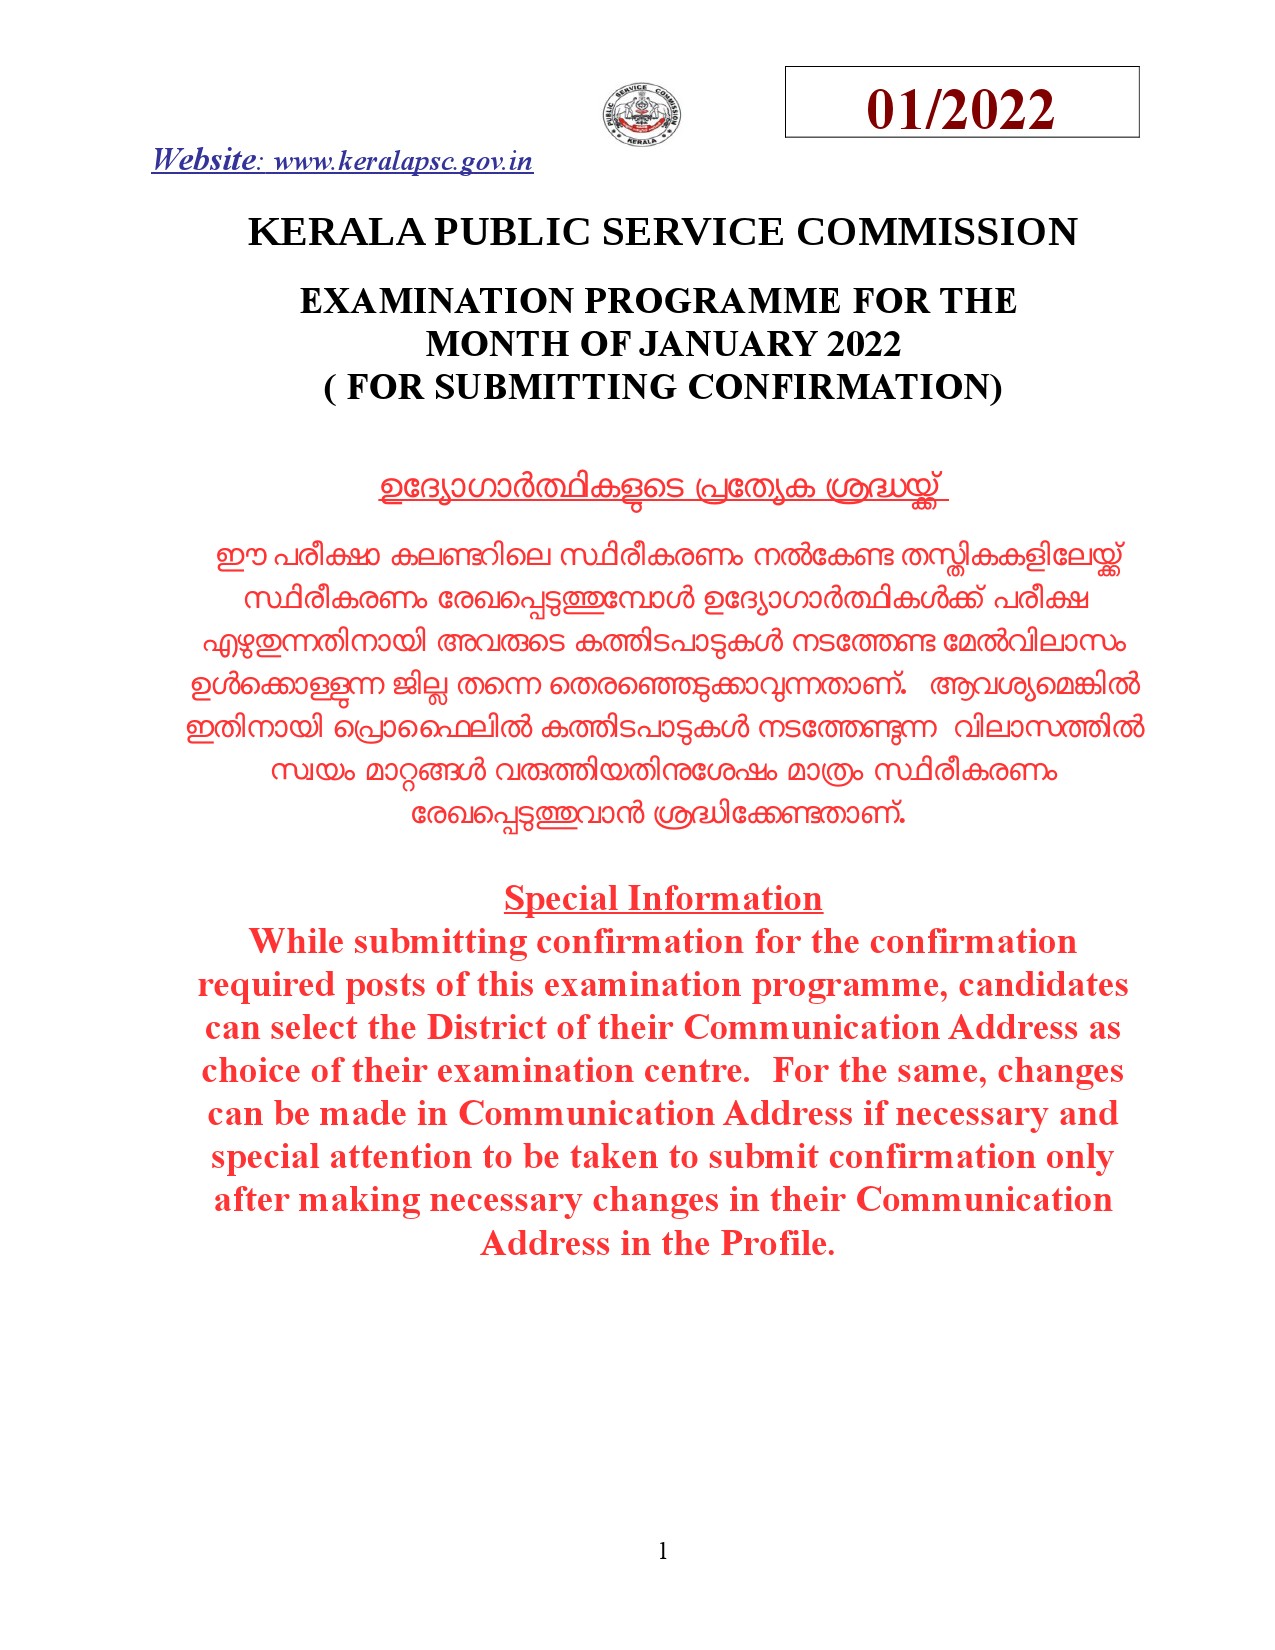 KPSC Examination Programme For The Month Of January 2022 - Notification Image 1